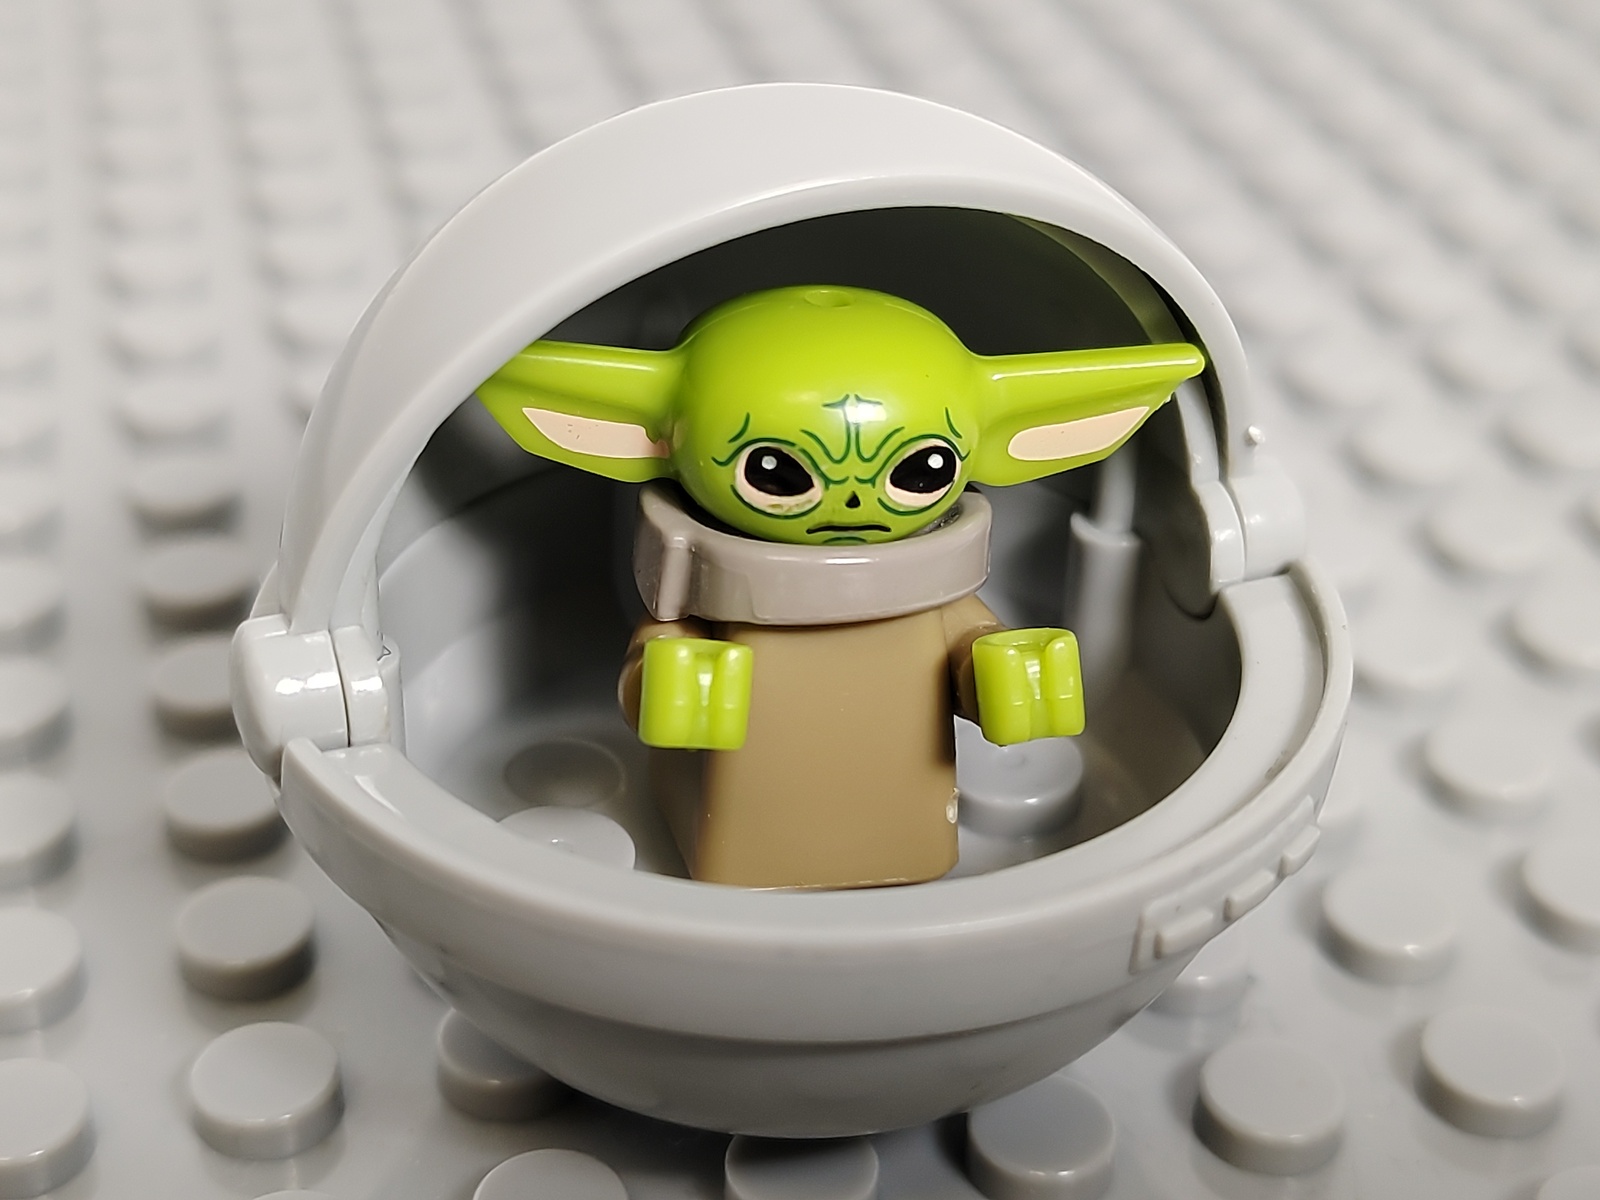 BABY YODA & WHITE CARRIAGE MINIFIGURE FIGURE USA SELLER NEW IN PACKAGE